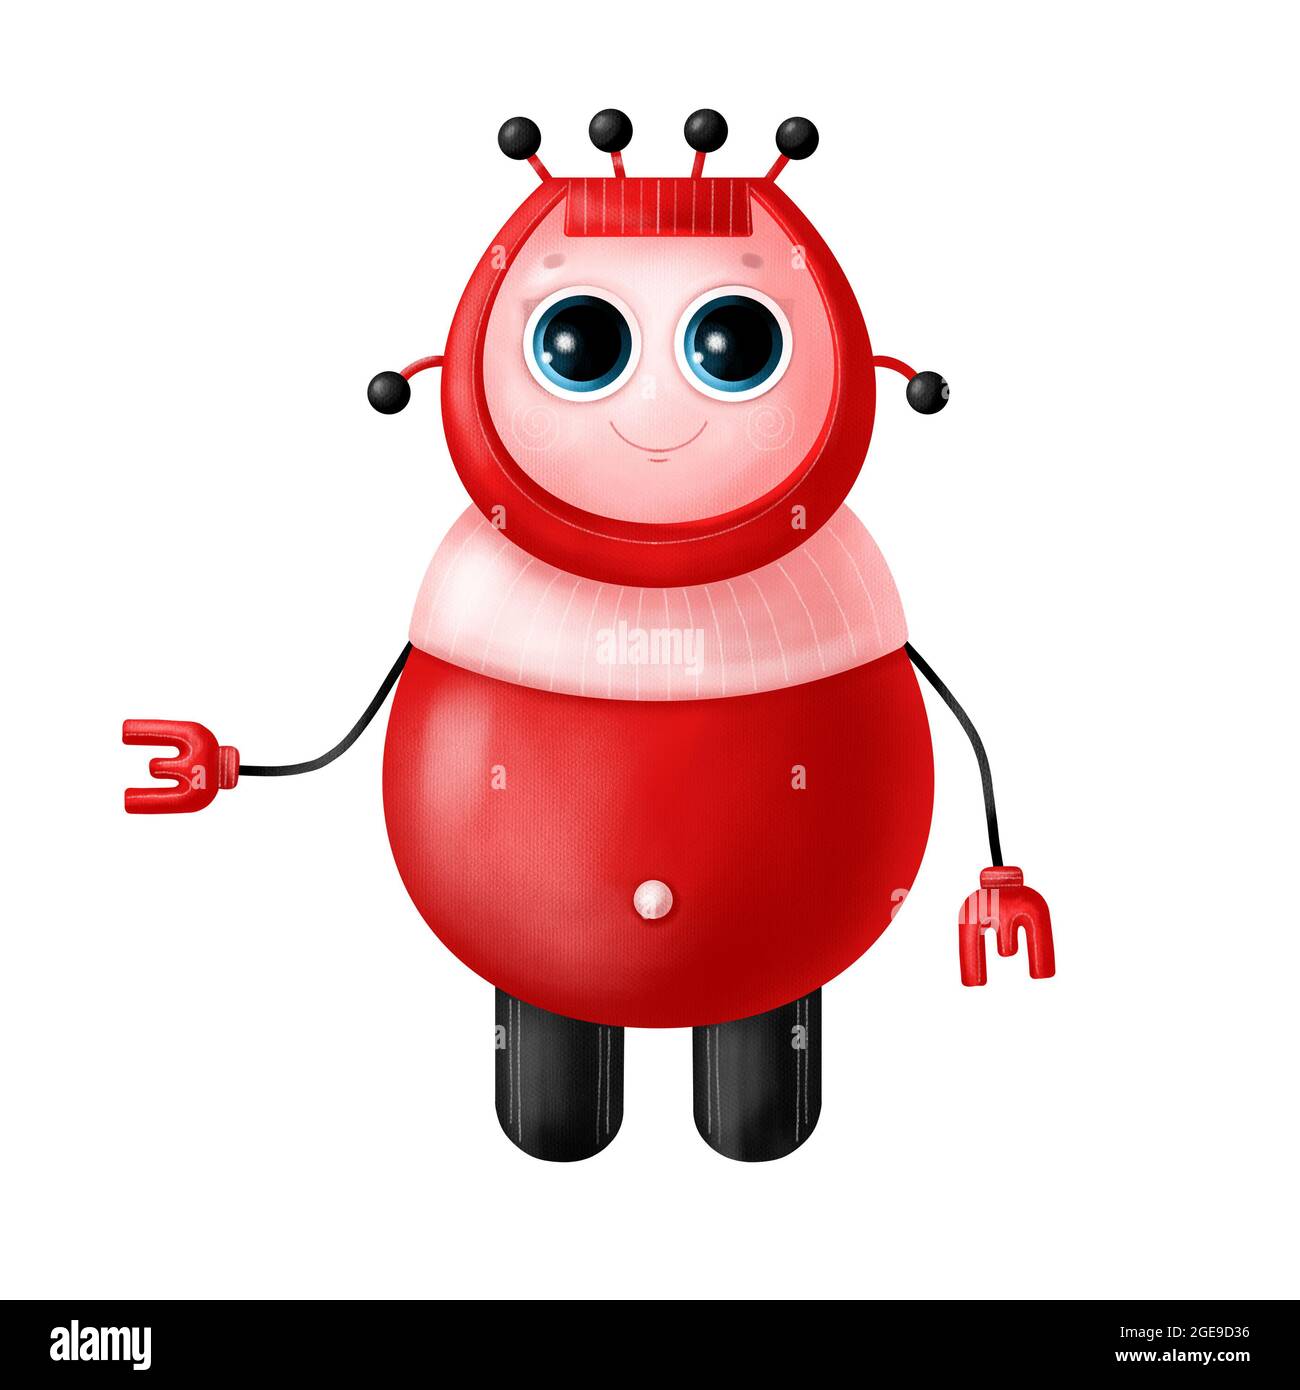 https://c8.alamy.com/comp/2GE9D36/cute-fantastic-robot-isolated-on-white-background-2GE9D36.jpg